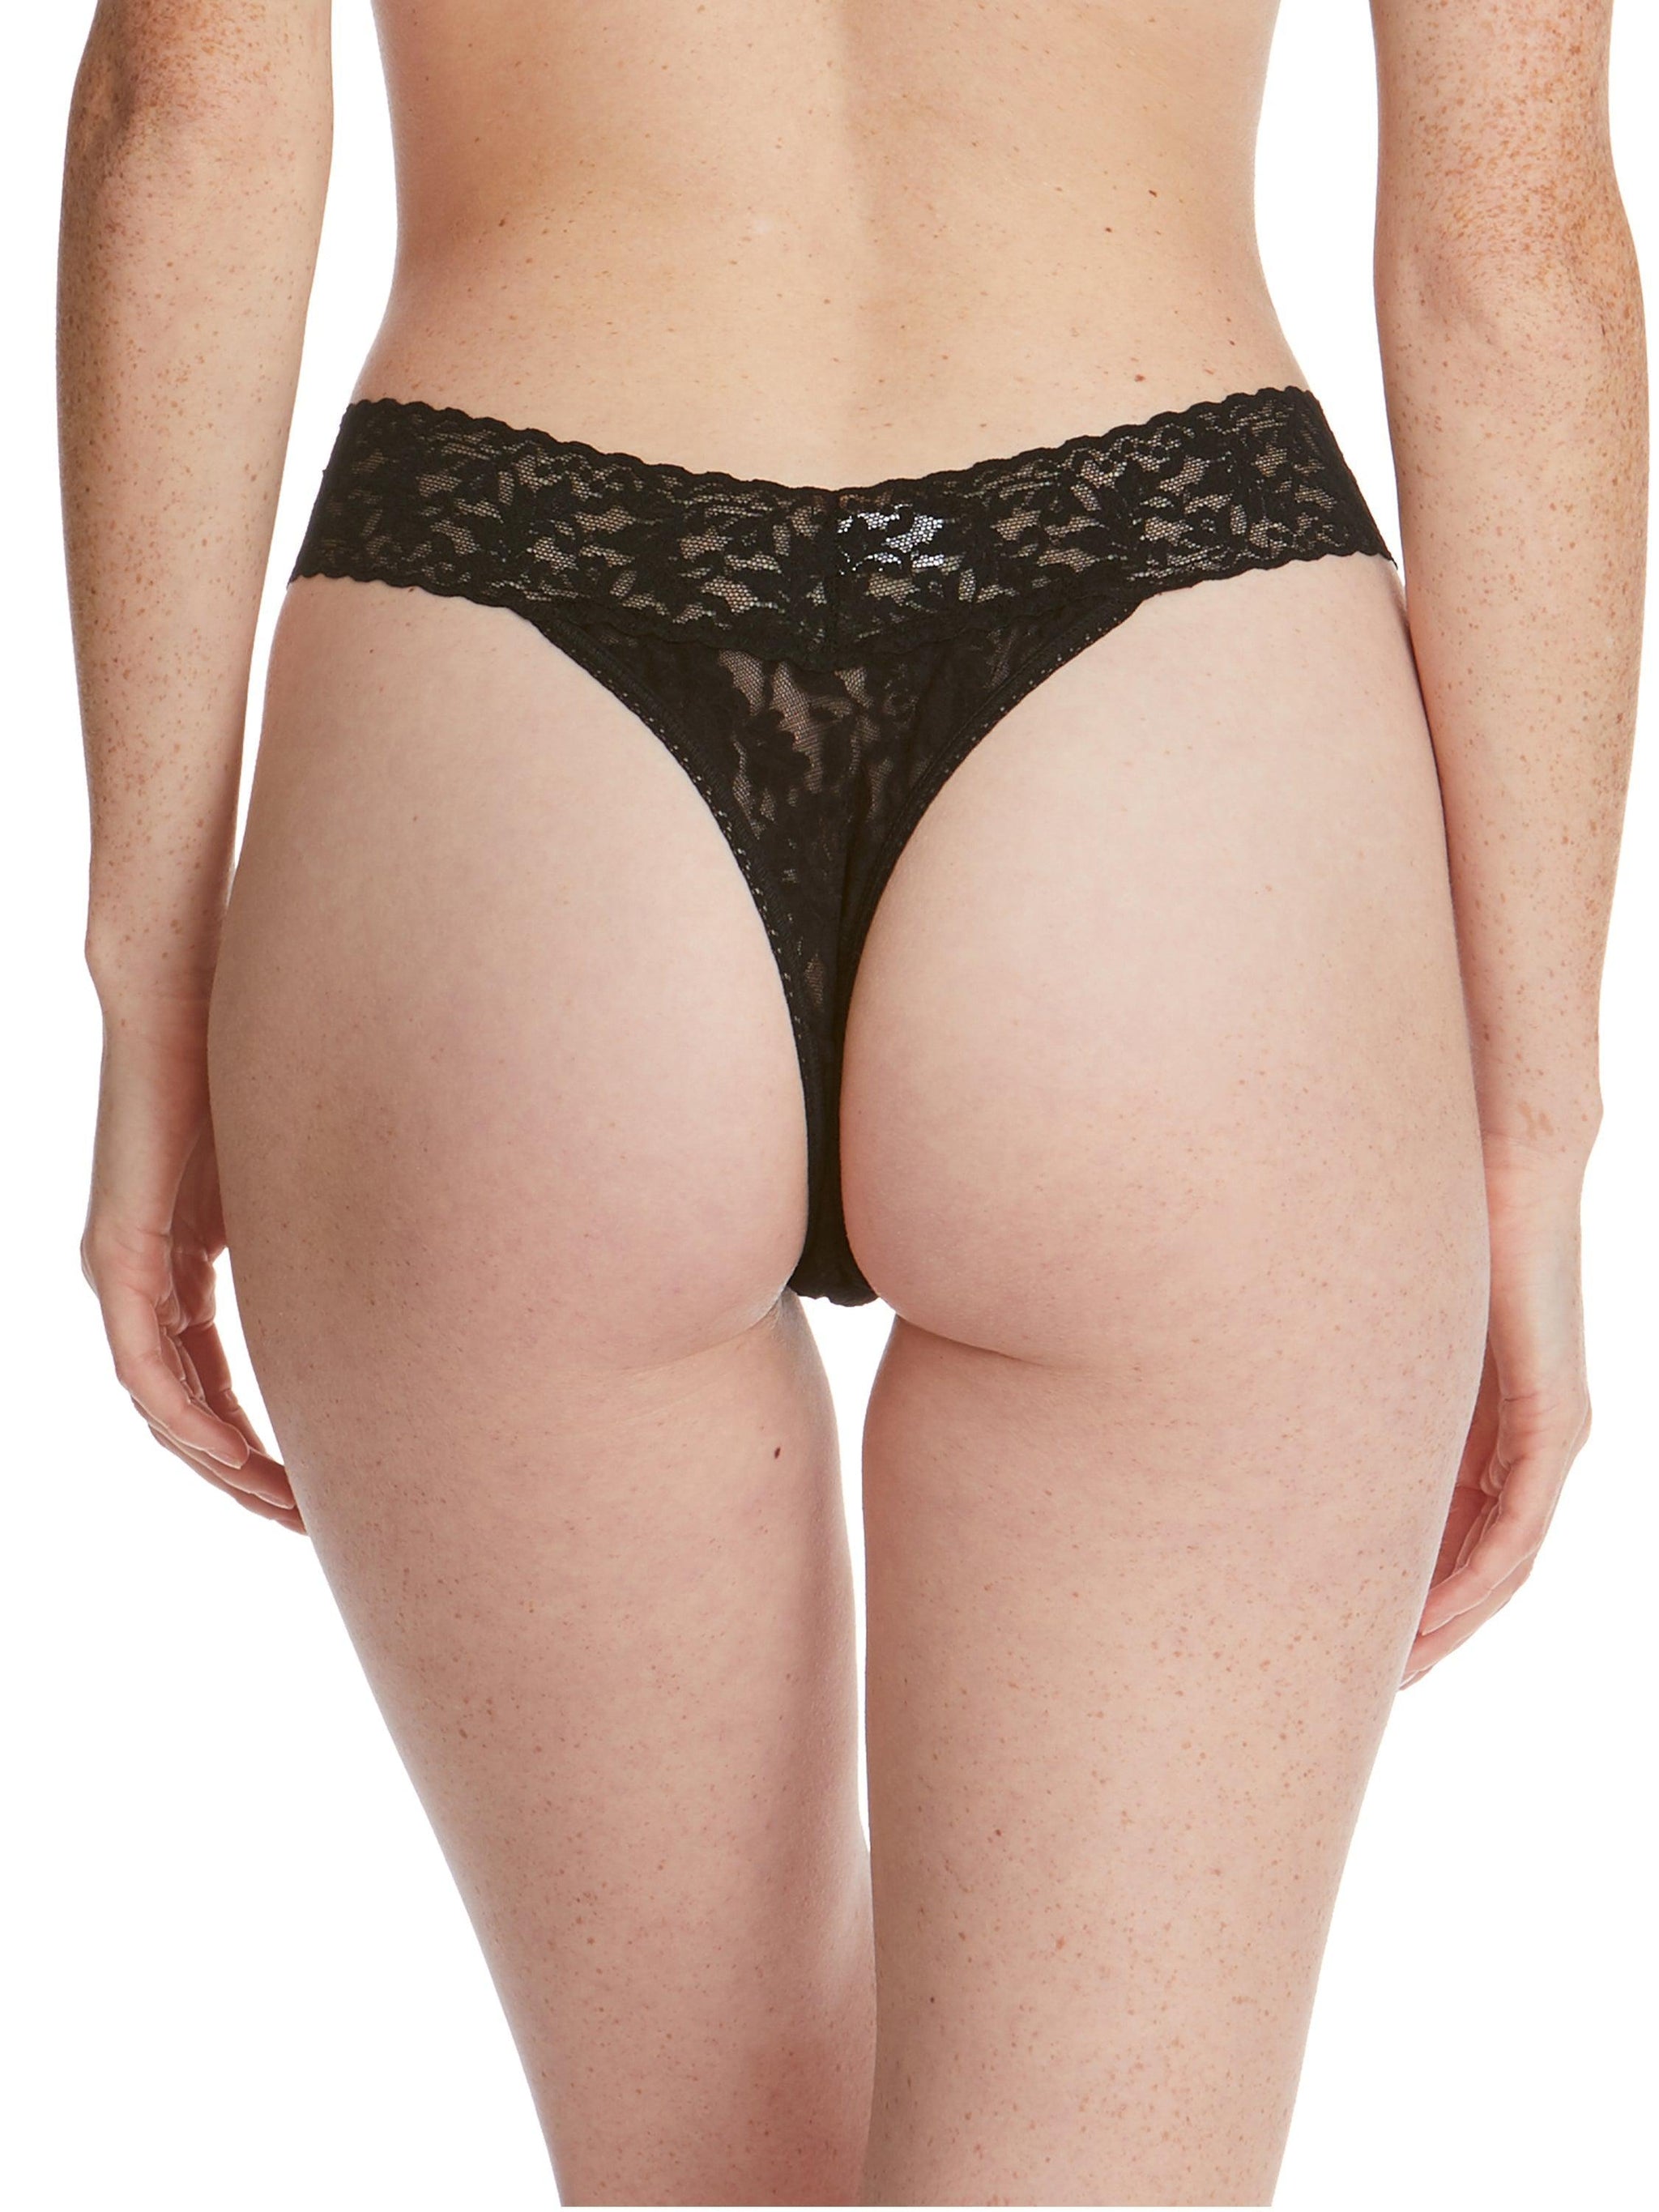 Sexy And Fun Black Lace Lace Panty Bra Set With Steel Ring And Thin Mold Cup  For Women And Girls T231101 From Ccawdb, $2.36